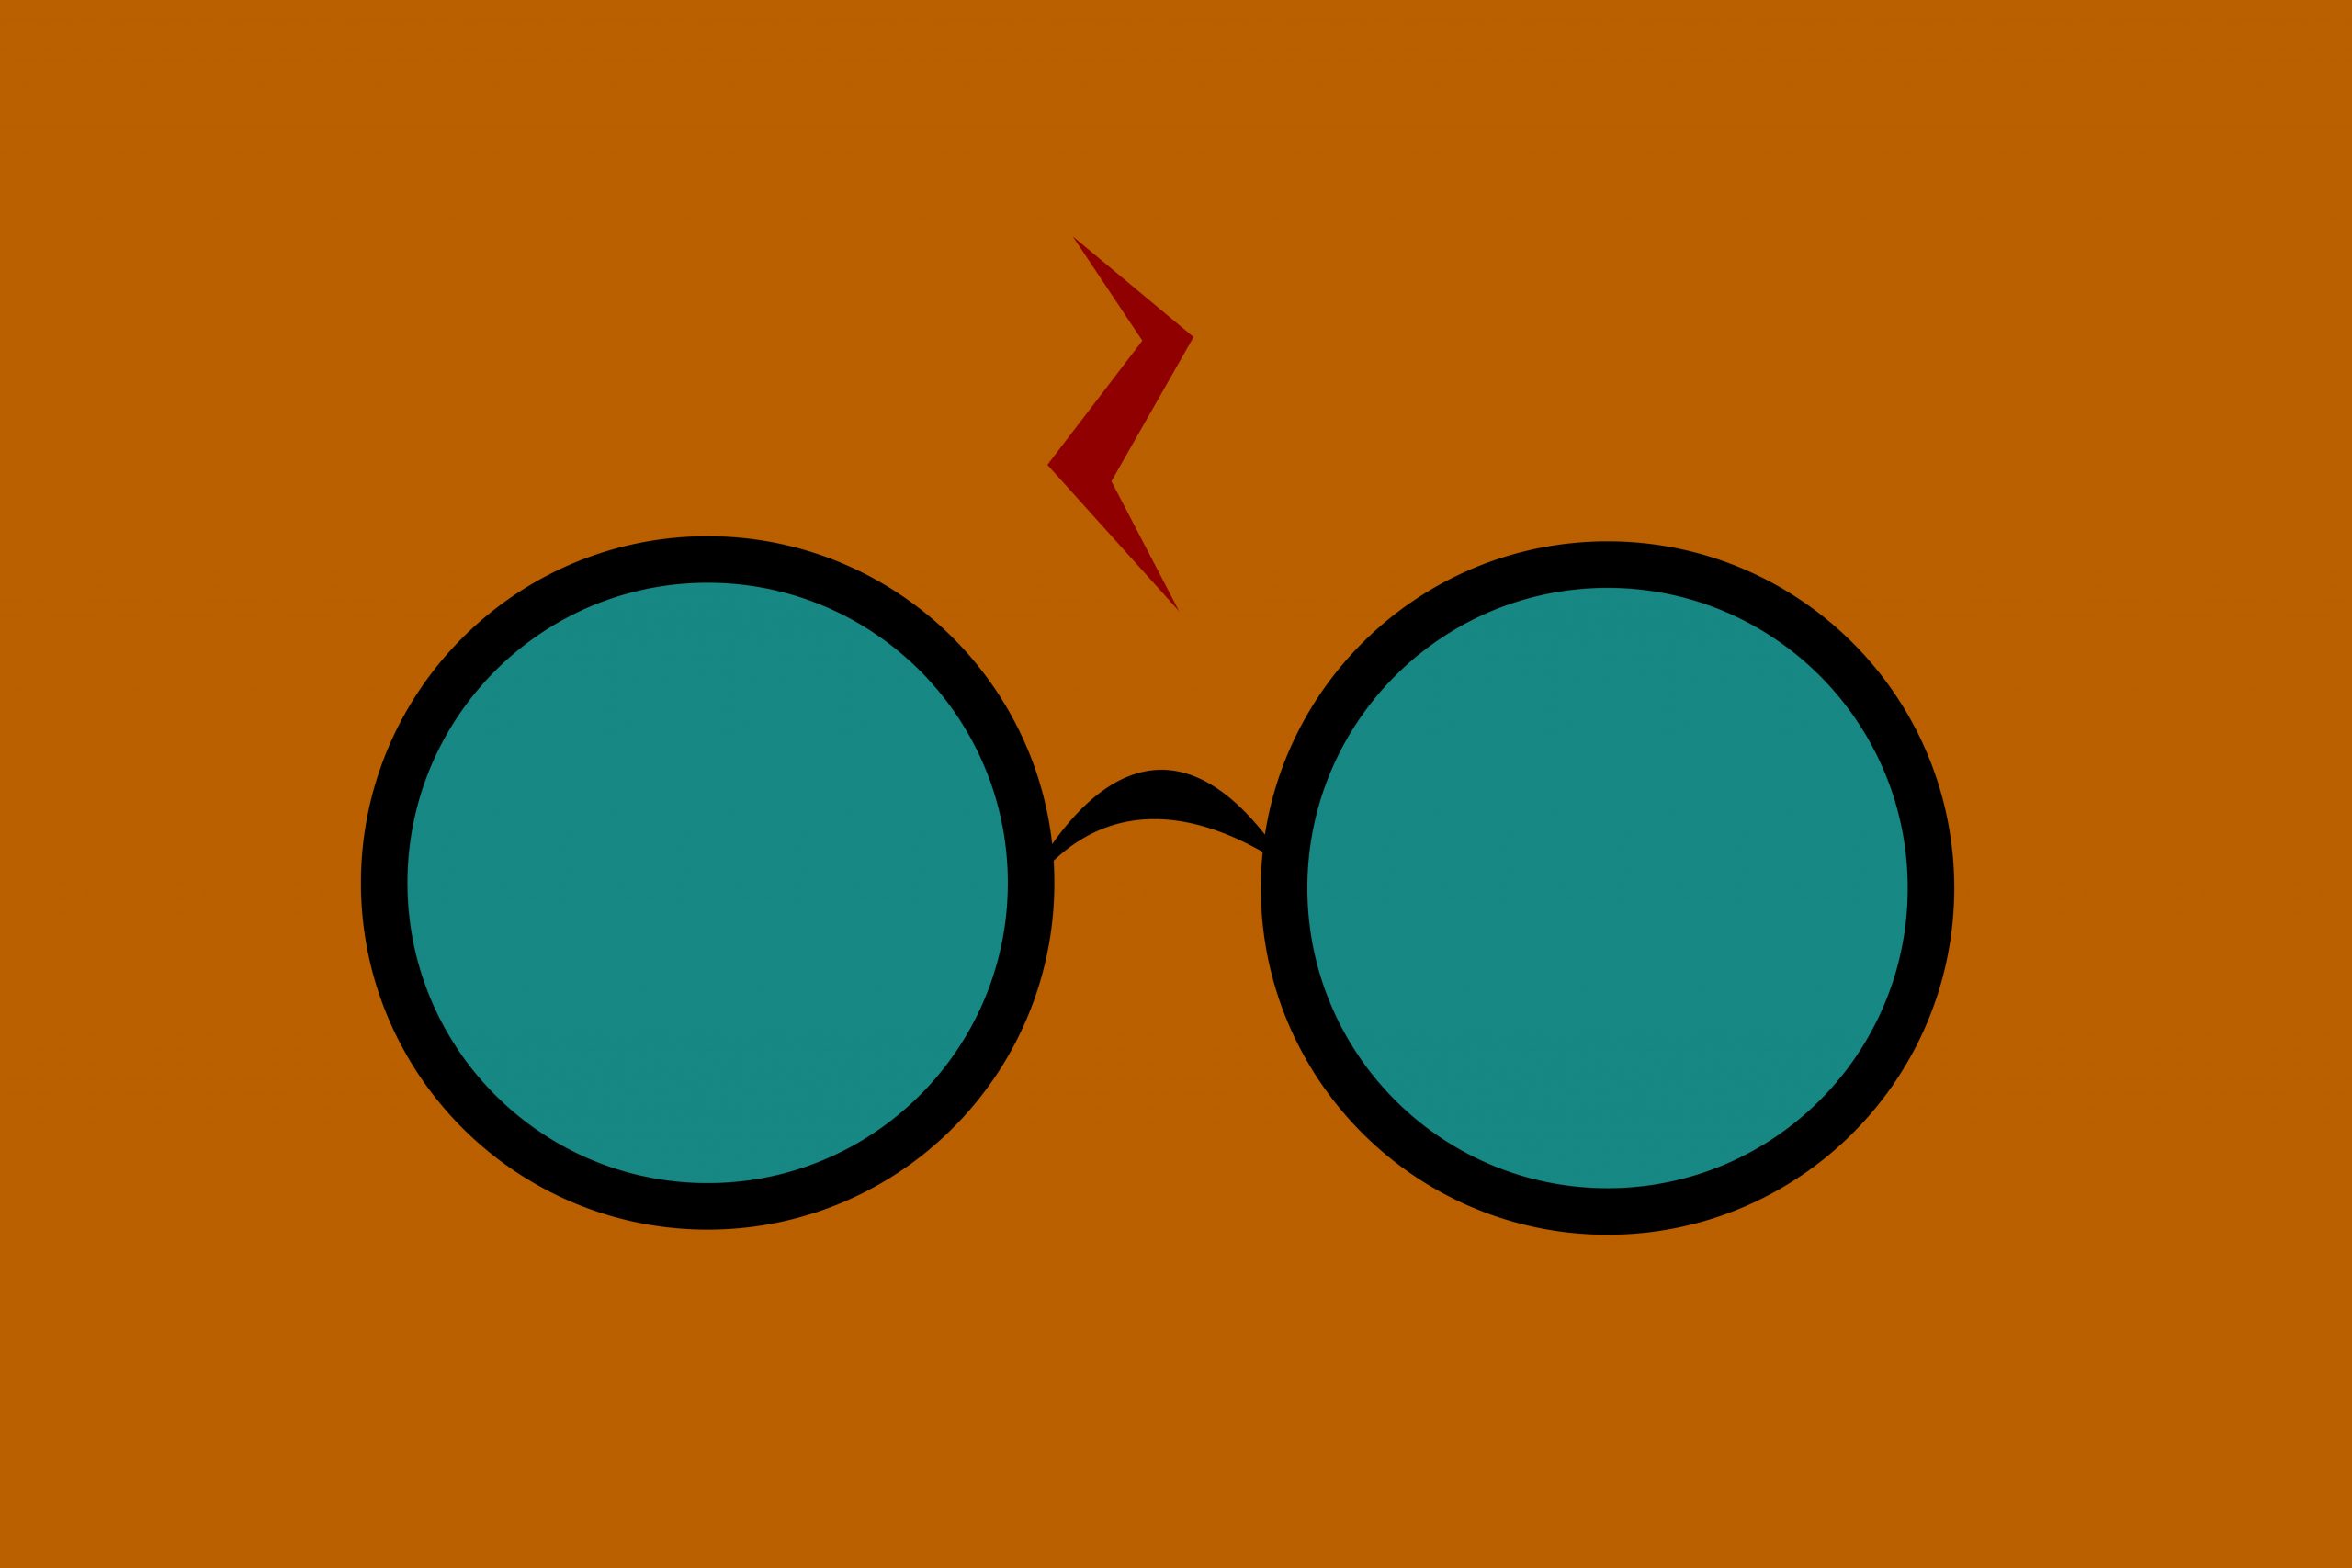 Illustration of the Harry Potter insignia.